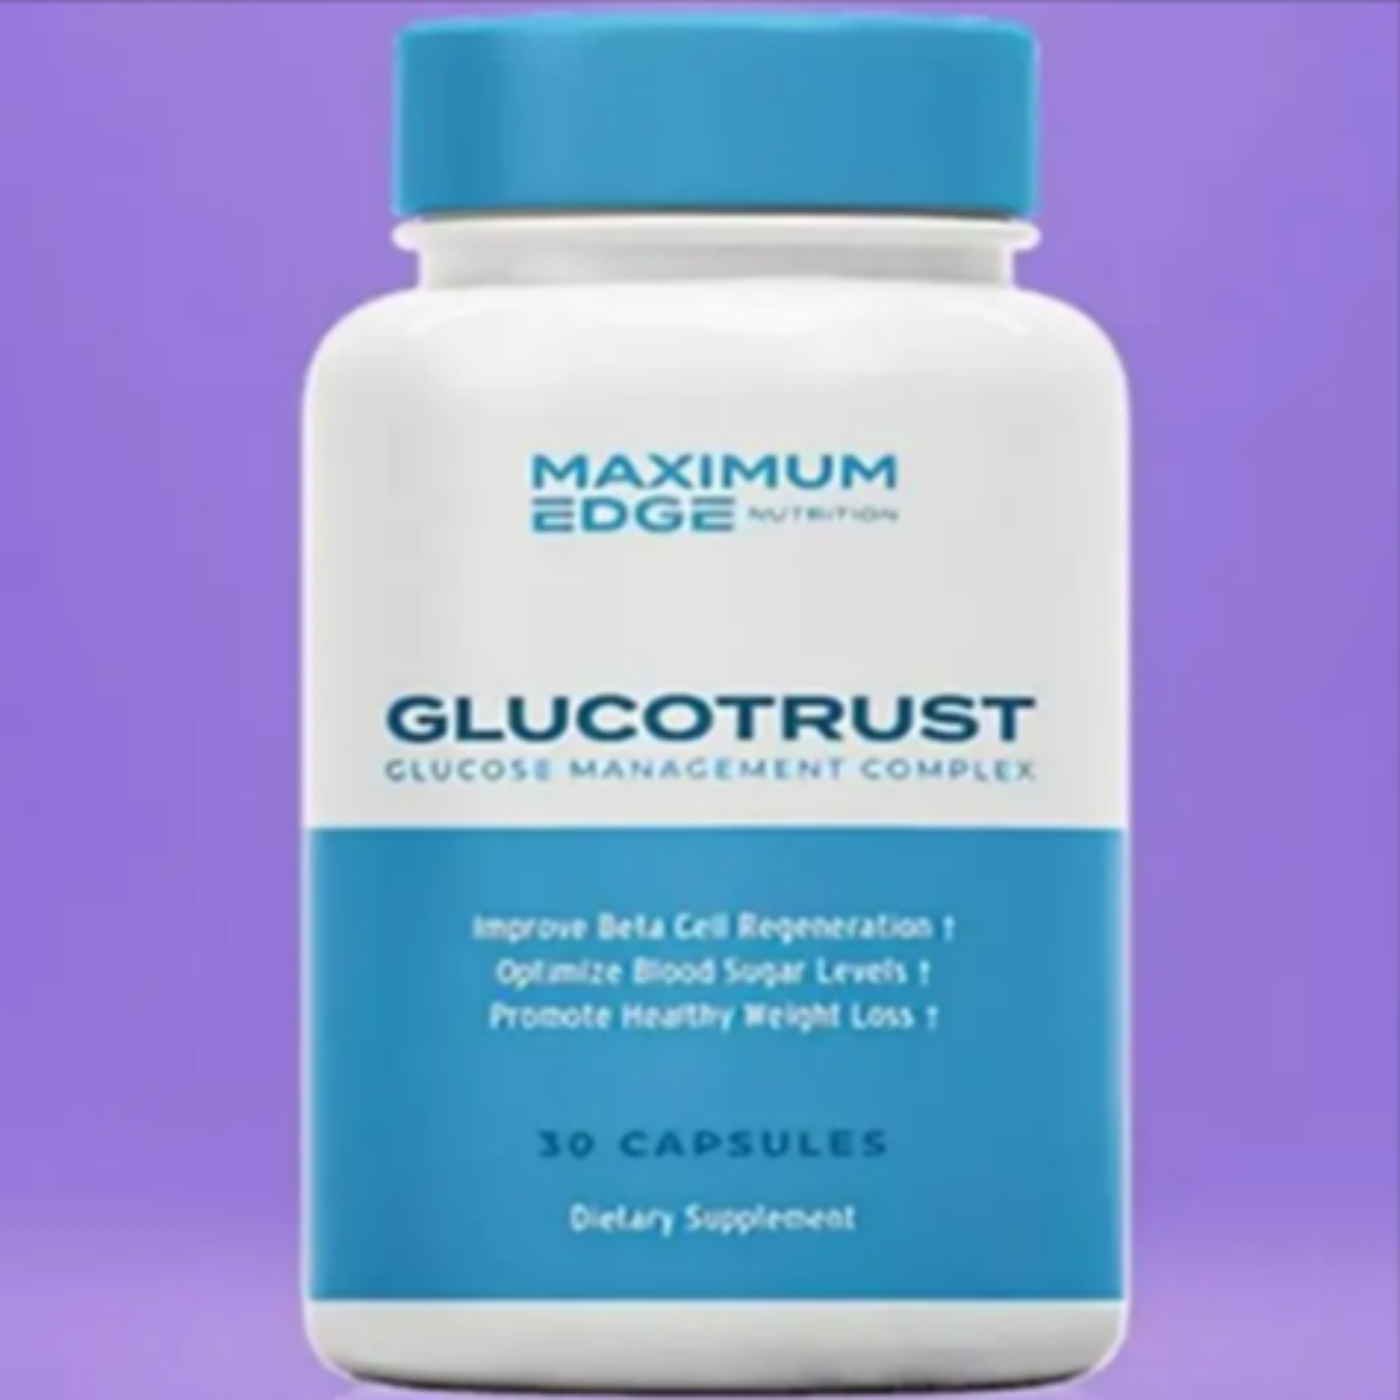 Gluco_Trust_Reviews_814dacffce.png